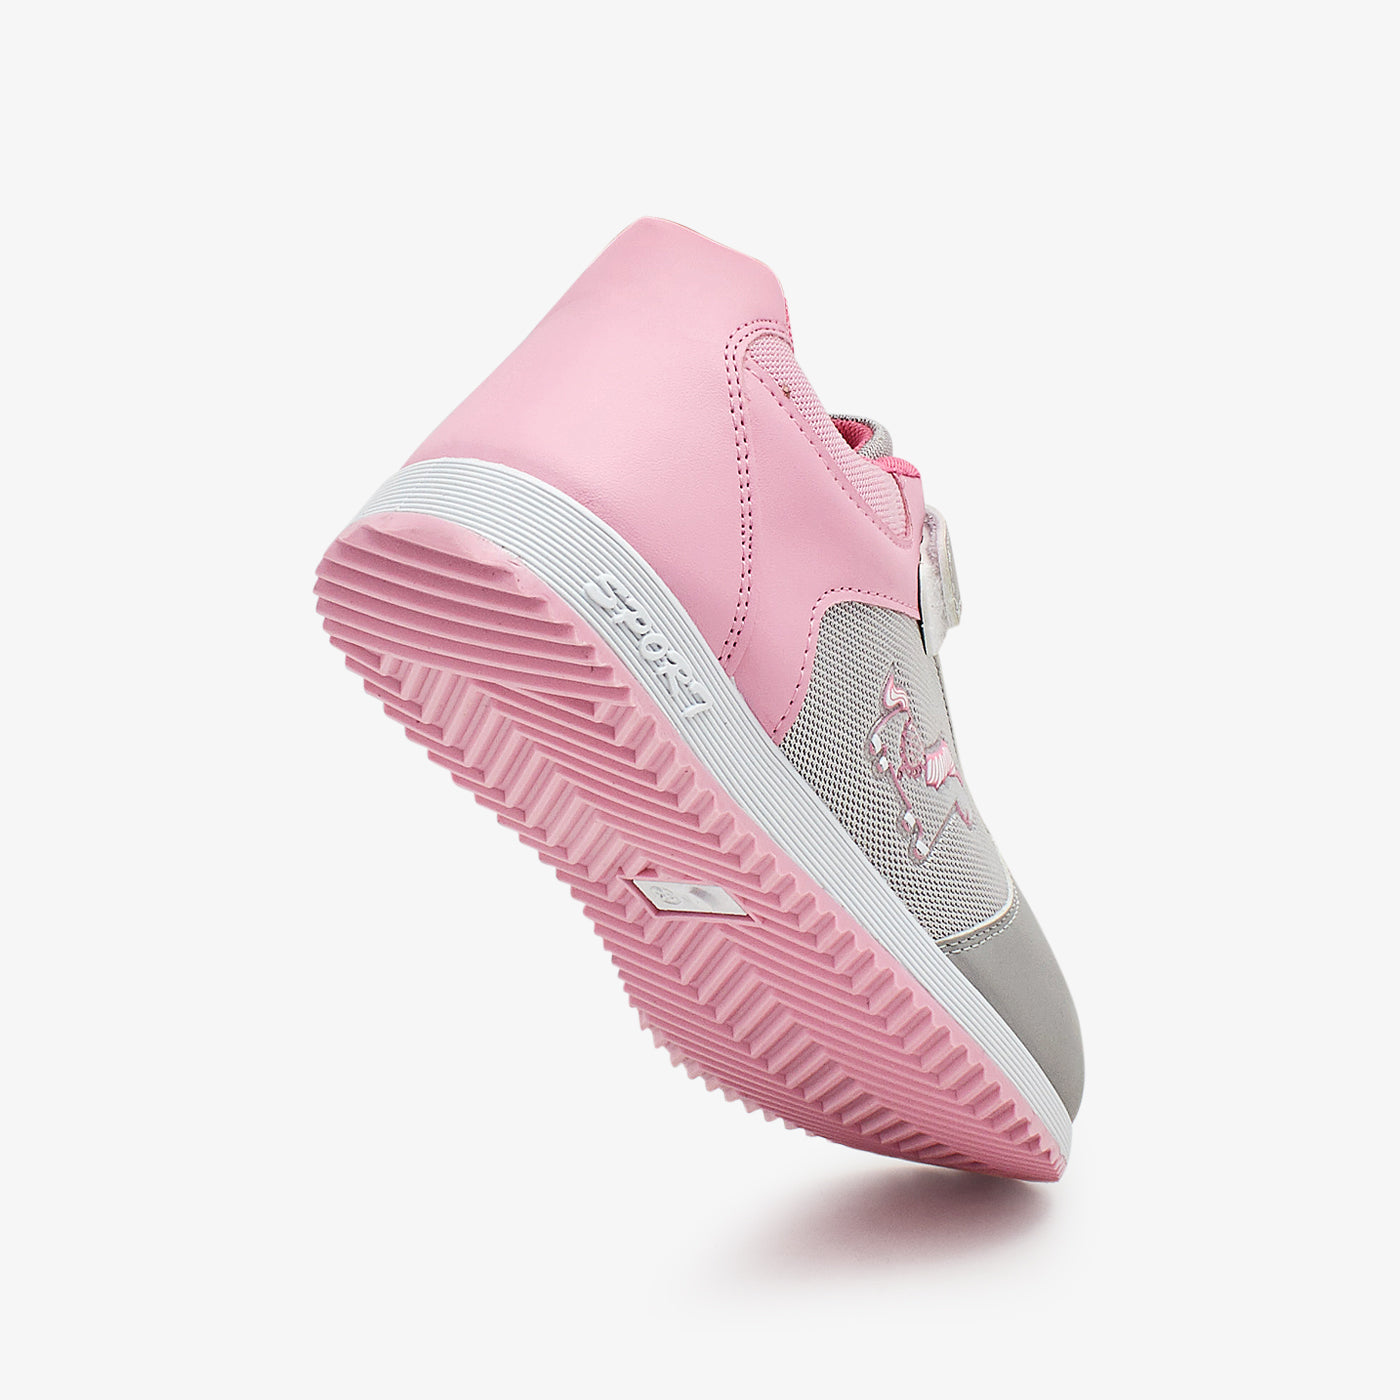 Girls Sports Shoes